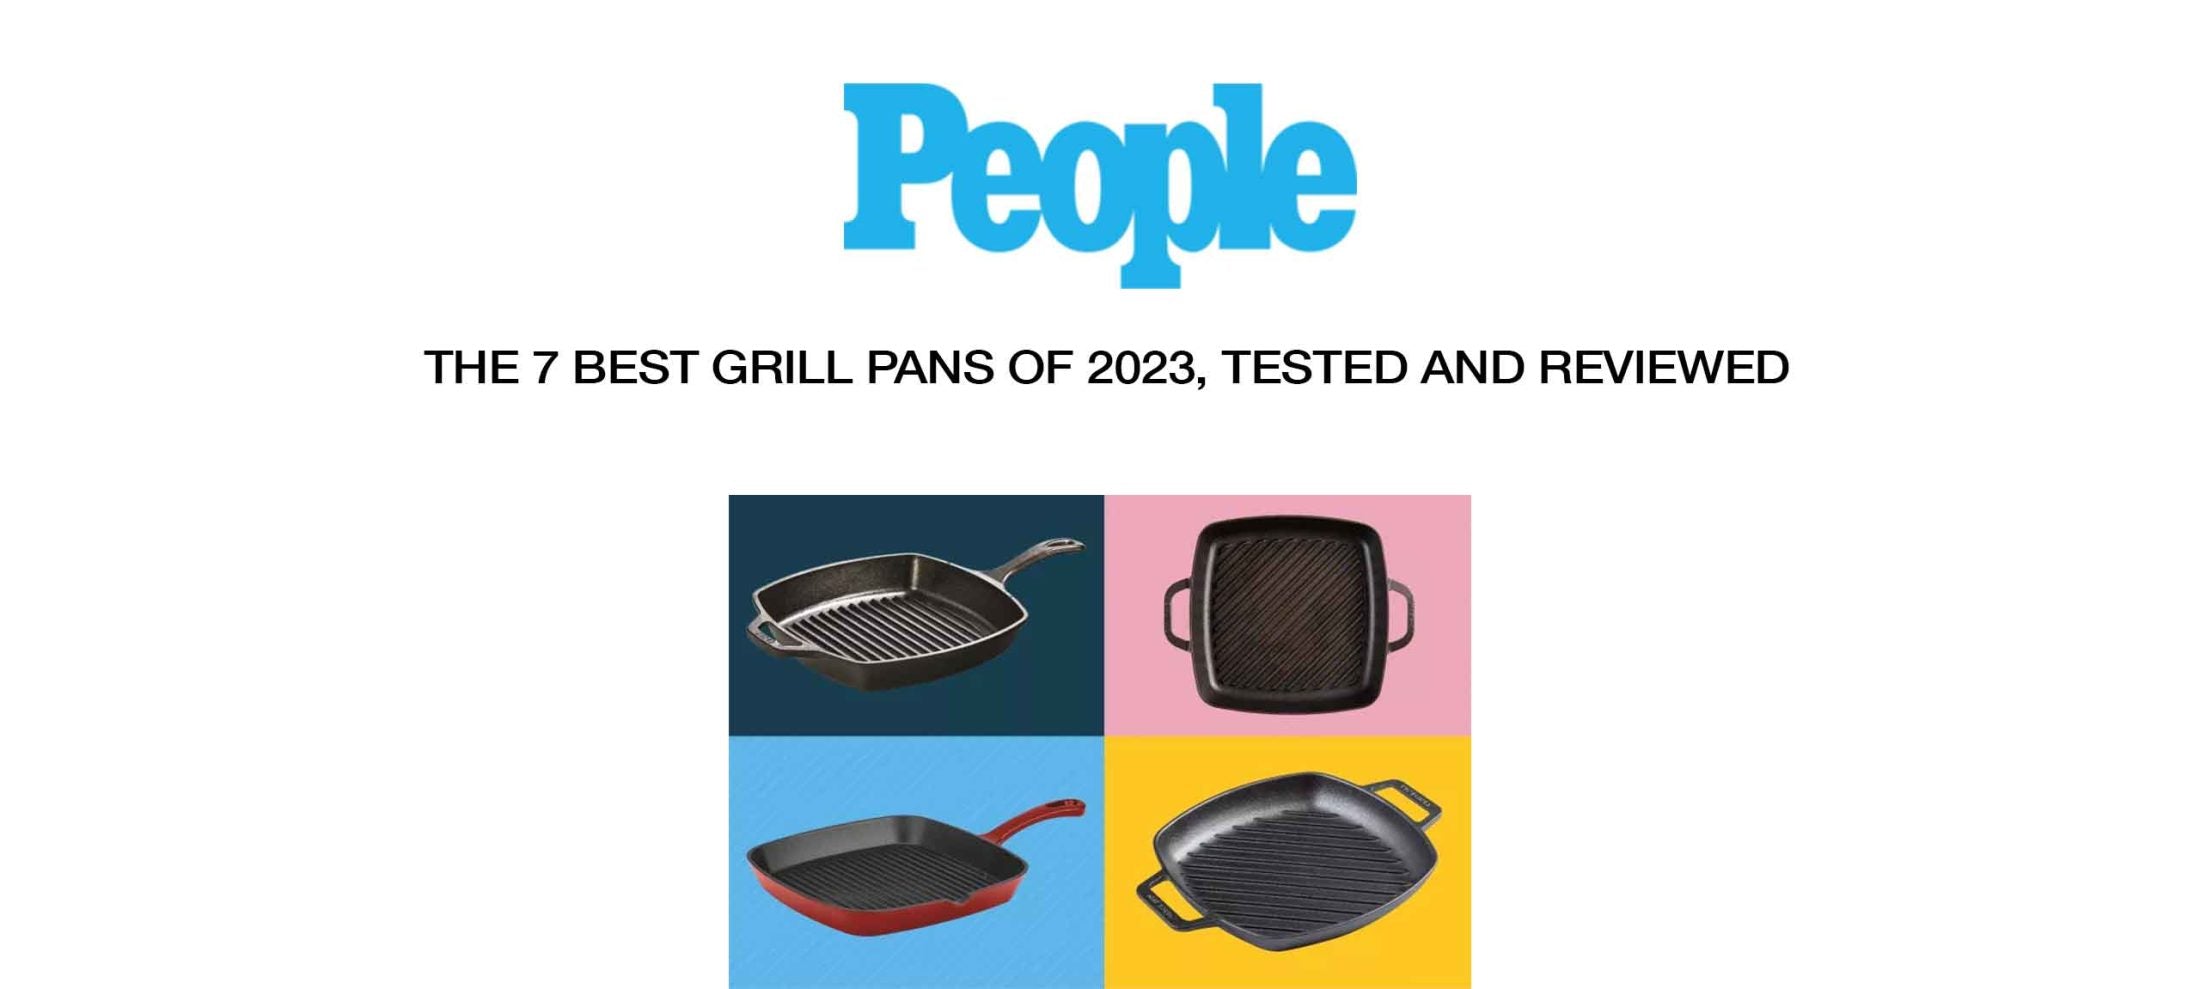 The 7 Best Grill Pans of 2023, Tested and Reviewed | People.com